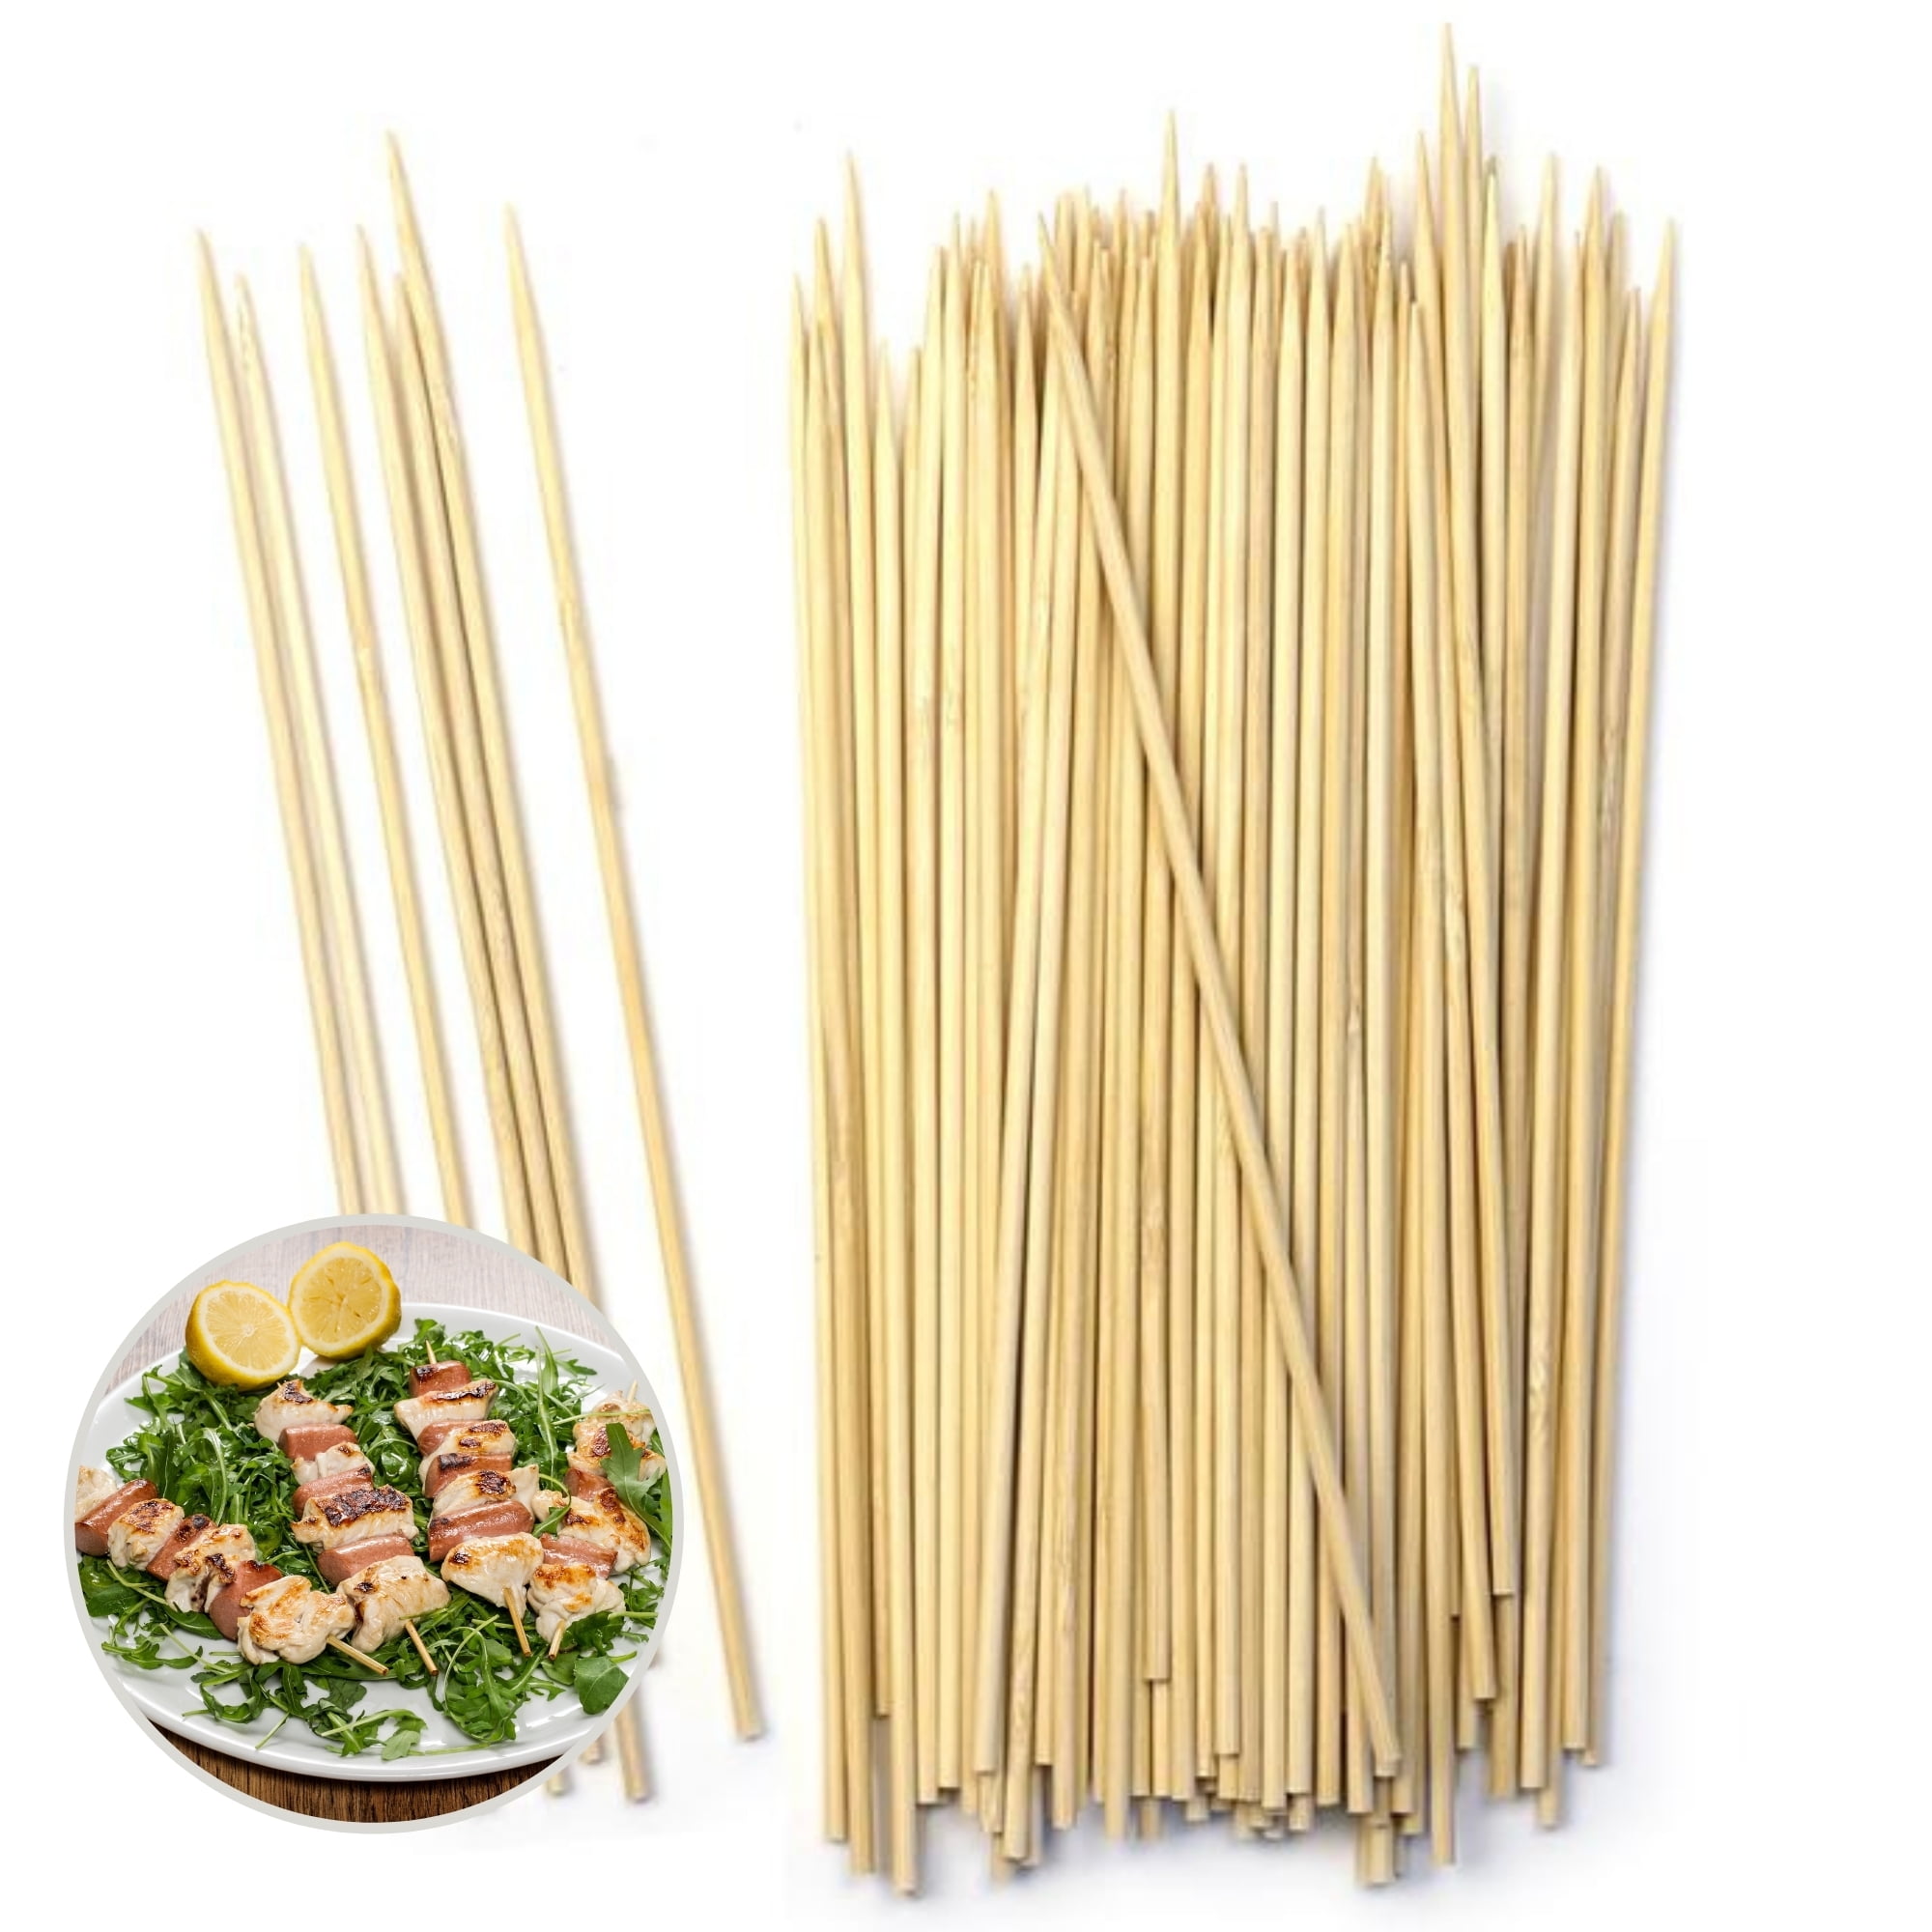 10 Wooden Bamboo BBQ Skewers Sticks Barbecue Kebab Chocolate Fountain *NEW* 400 